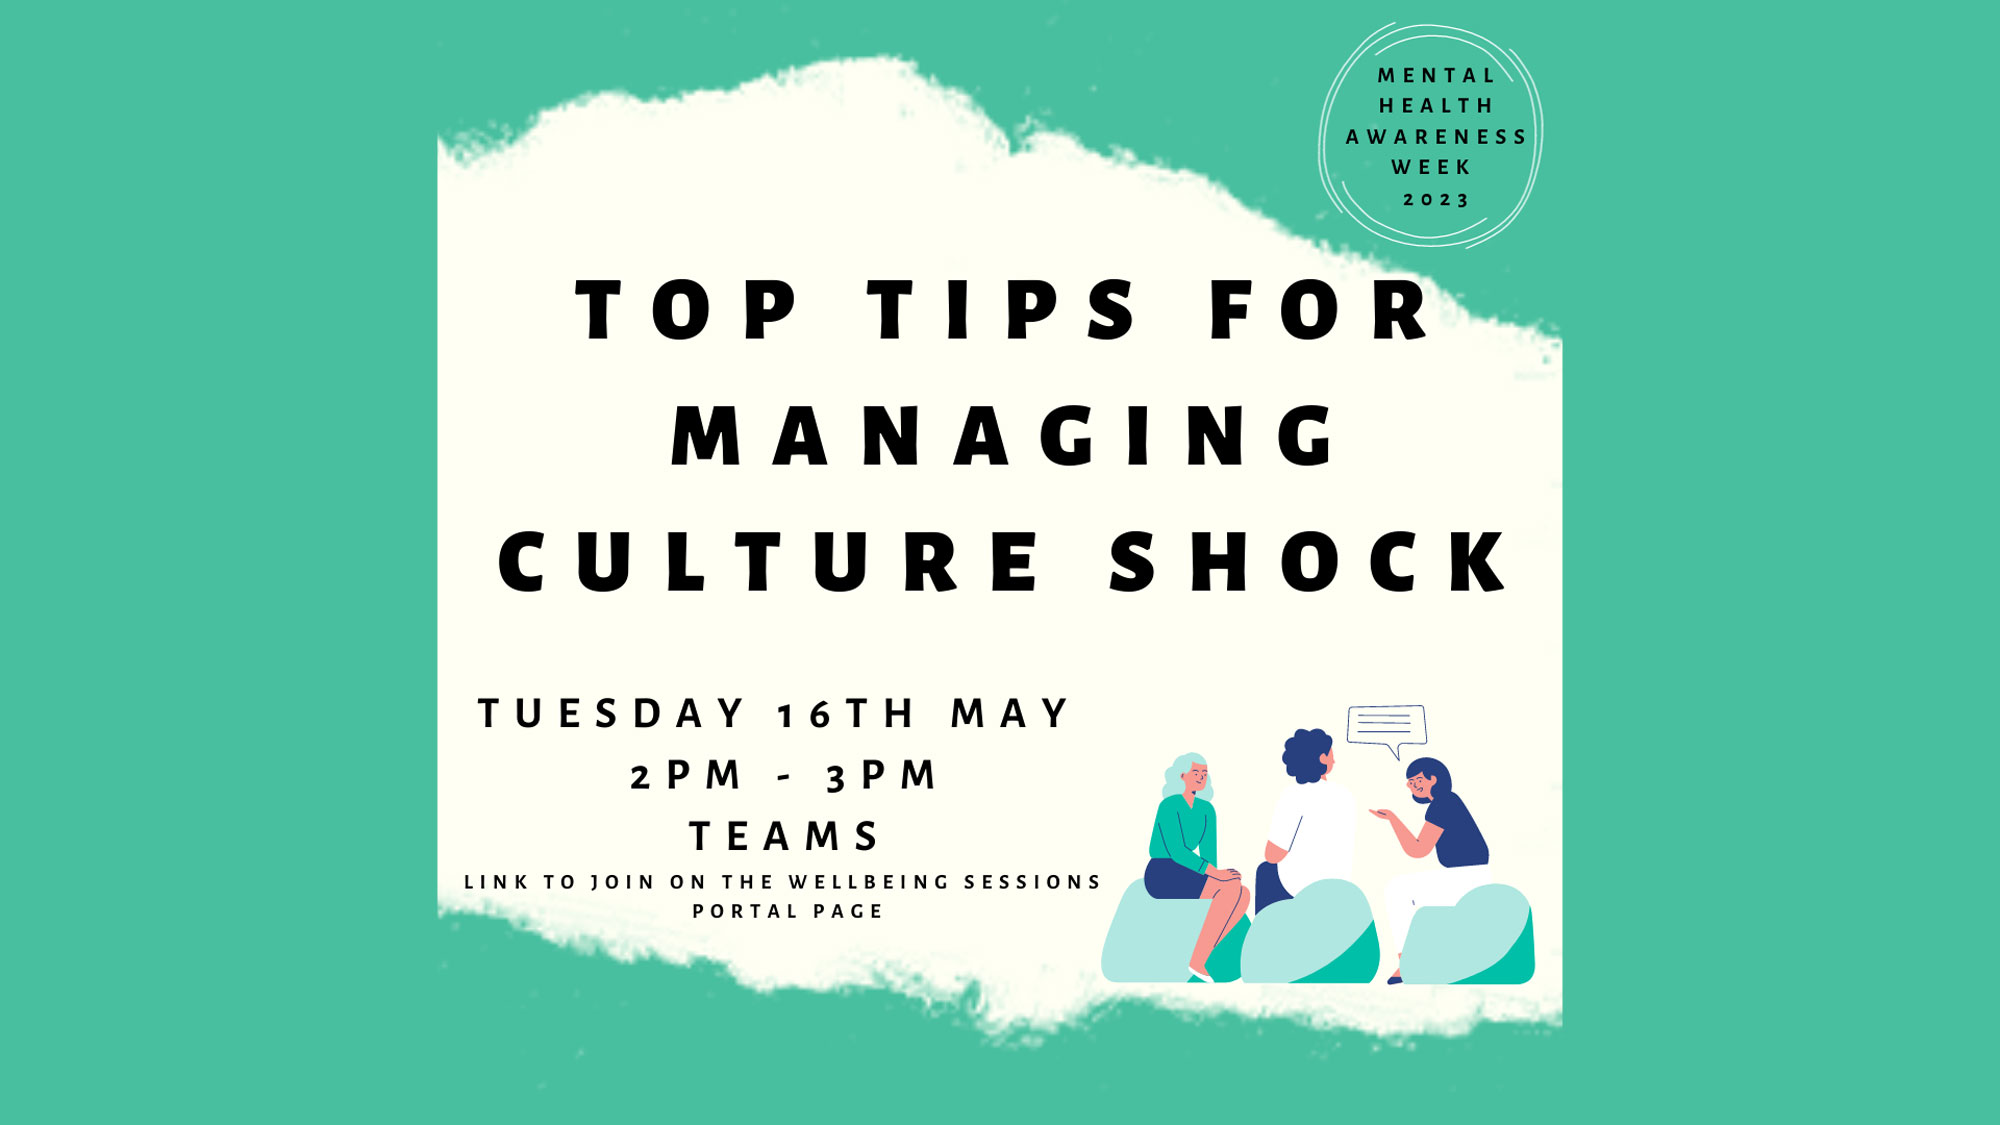 Top tips for manging culture shock